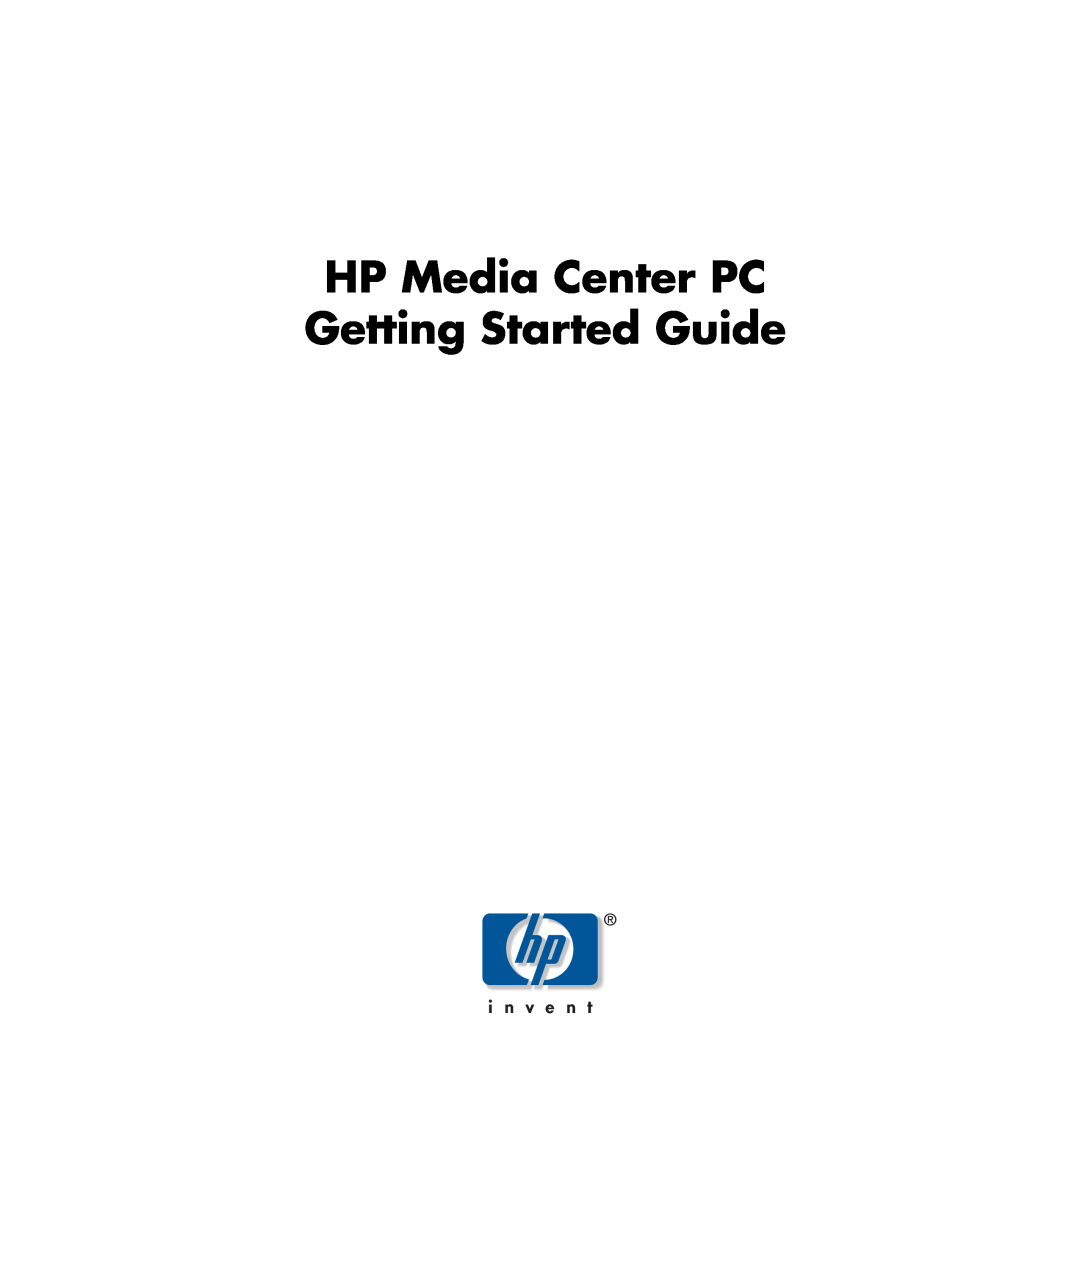 HP m1050y (PJ720AV), m1299a, m1050e (PU061AV), m1050y (PU060AV), m1297c manual HP Media Center PC Getting Started Guide 